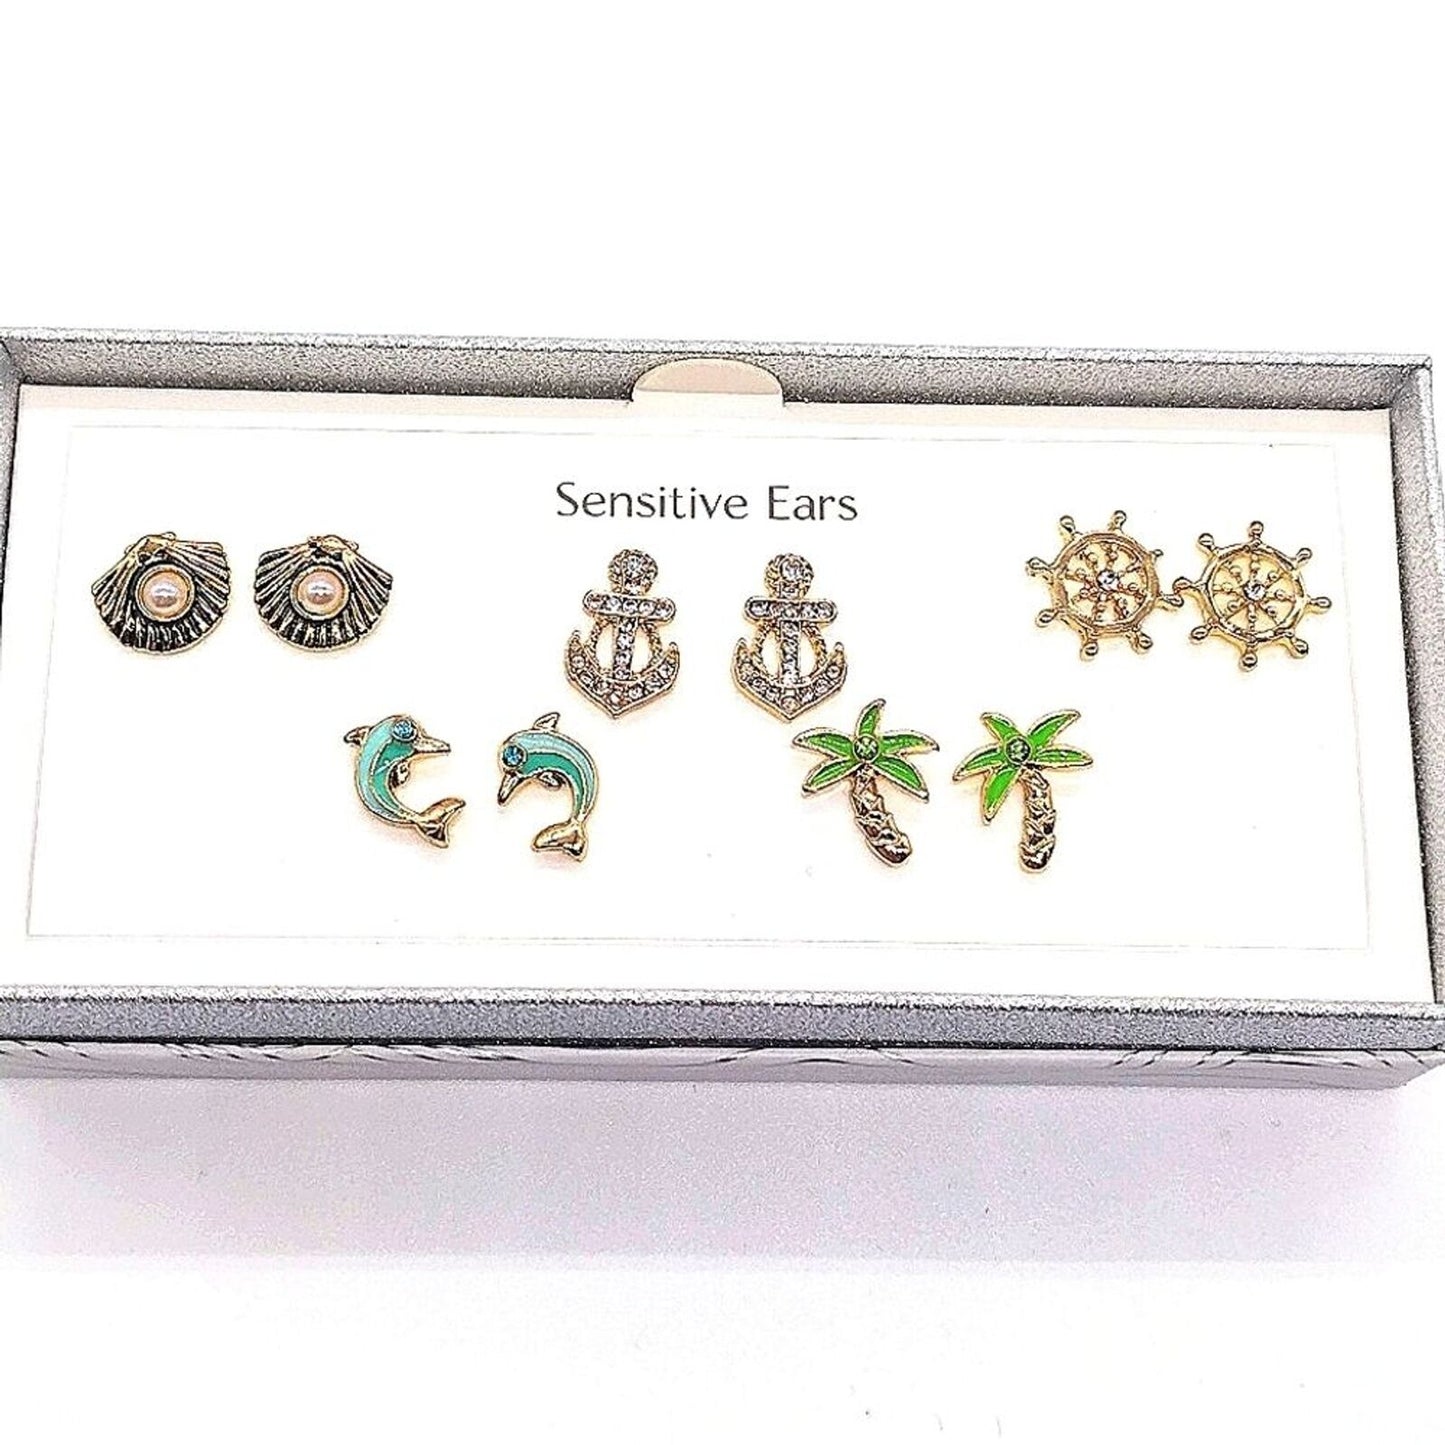 Bay Studio Gold 5 Stud Earrings Set Dolphin Clam Anchor Palm Tree Cubic Zirconia